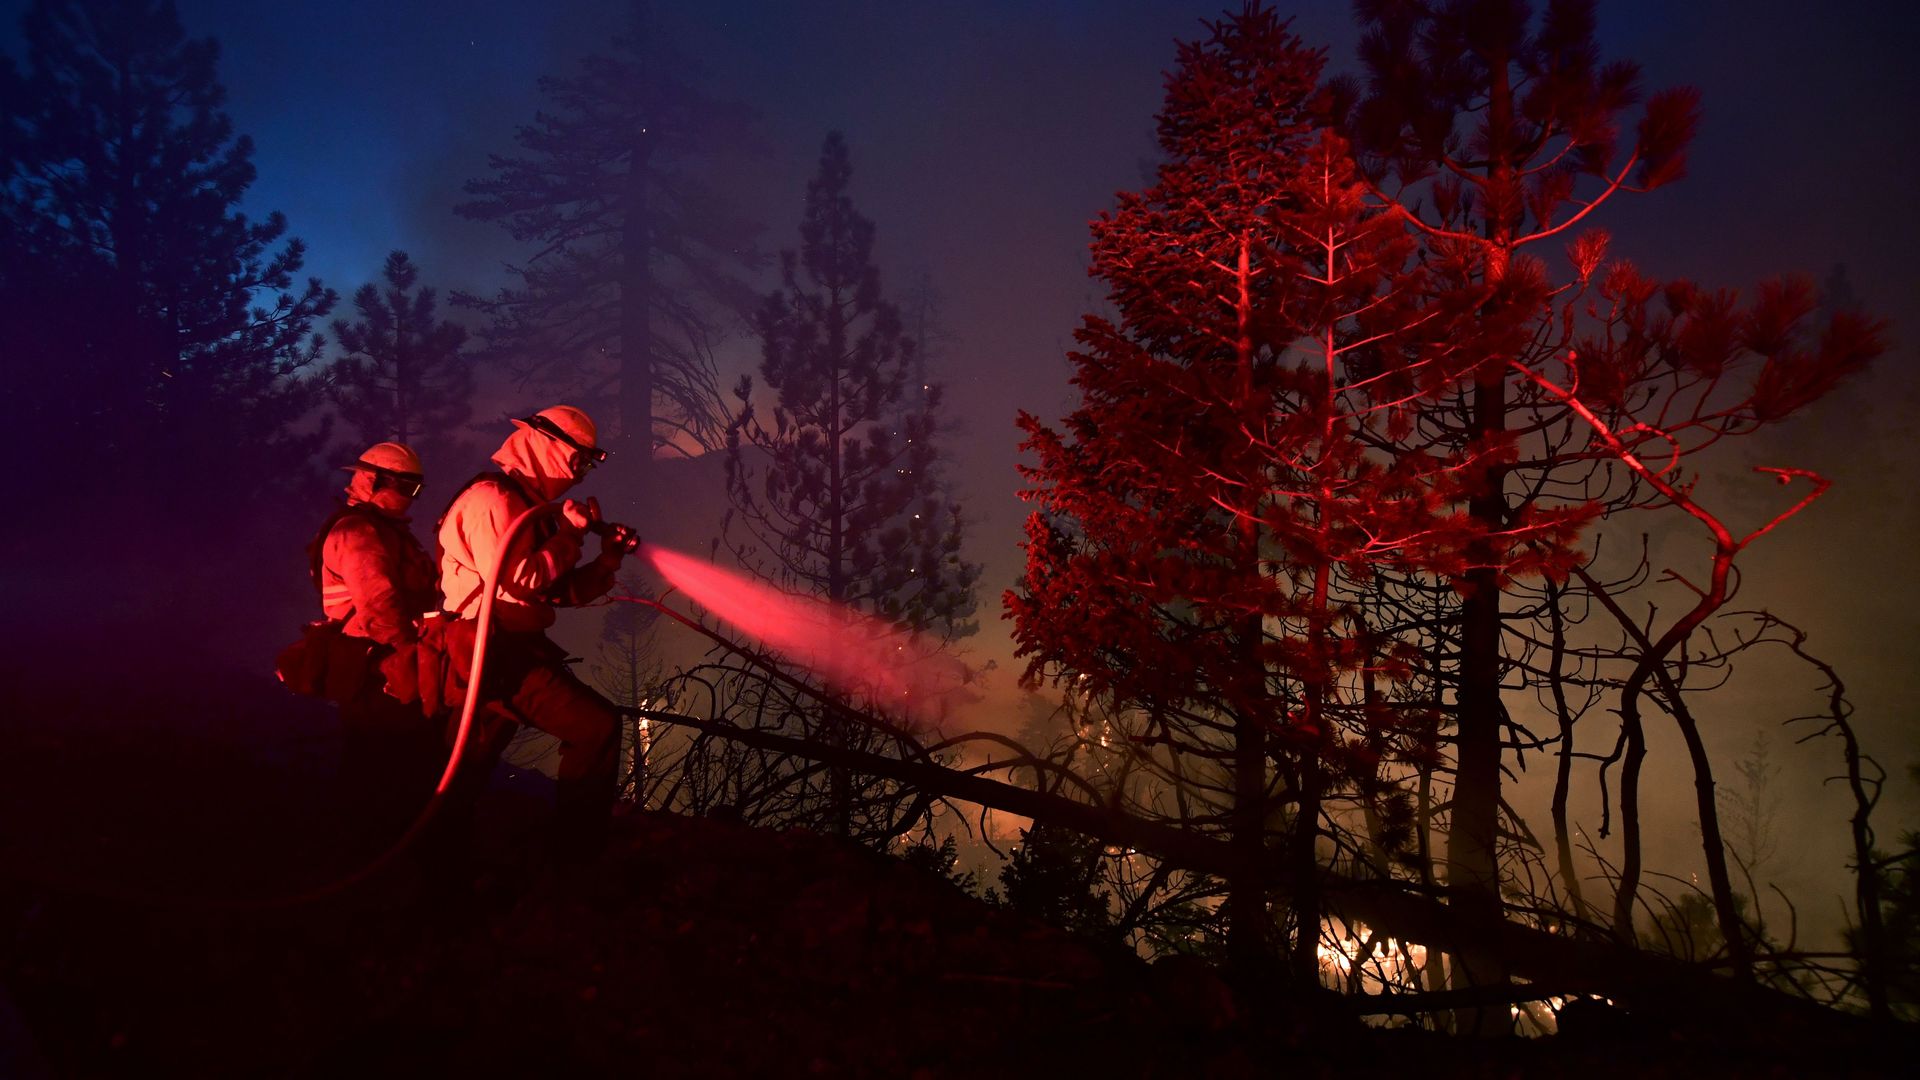  Lights from a firetruck illuminate firefighters working the Bobcat Fire burning near Cedar Springs in the Angeles National Forest on September 21, 2020 in Los Angeles, California. 